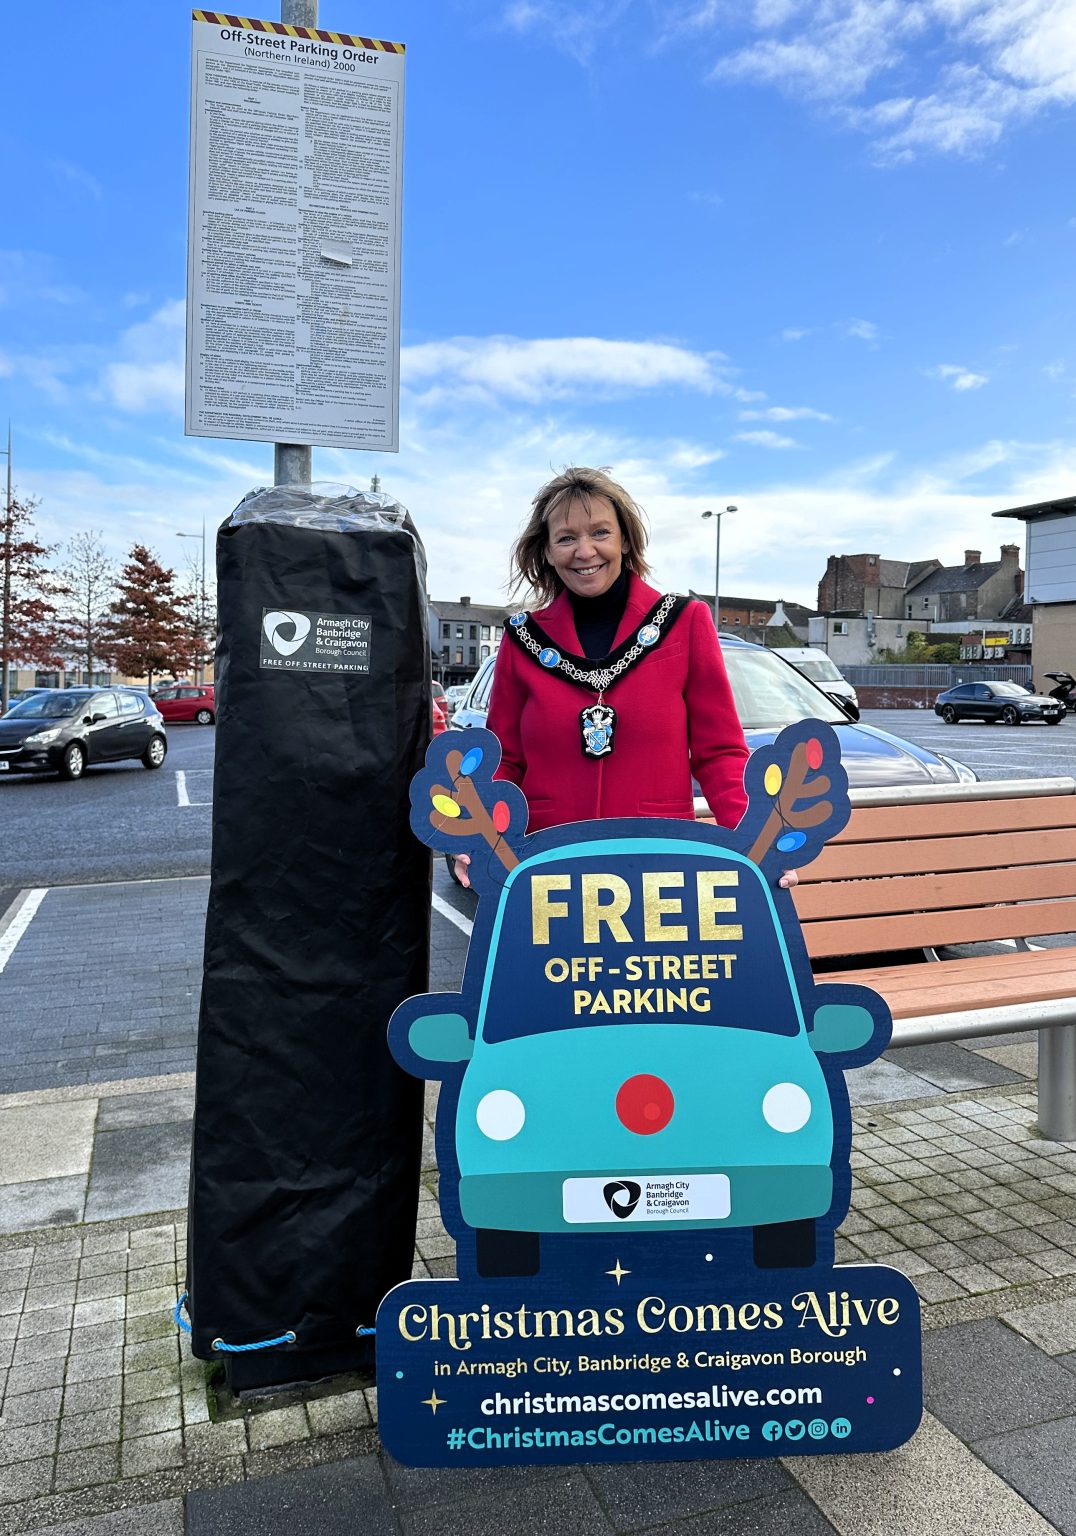 Lord Mayor Alderman Margaret Tinsley announces free parking in council-owned off-street pay-and-display car parks in Armagh City, Banbridge, Lurgan and Portadown on Saturday 2nd, 9th, 16th, and 23rd December.